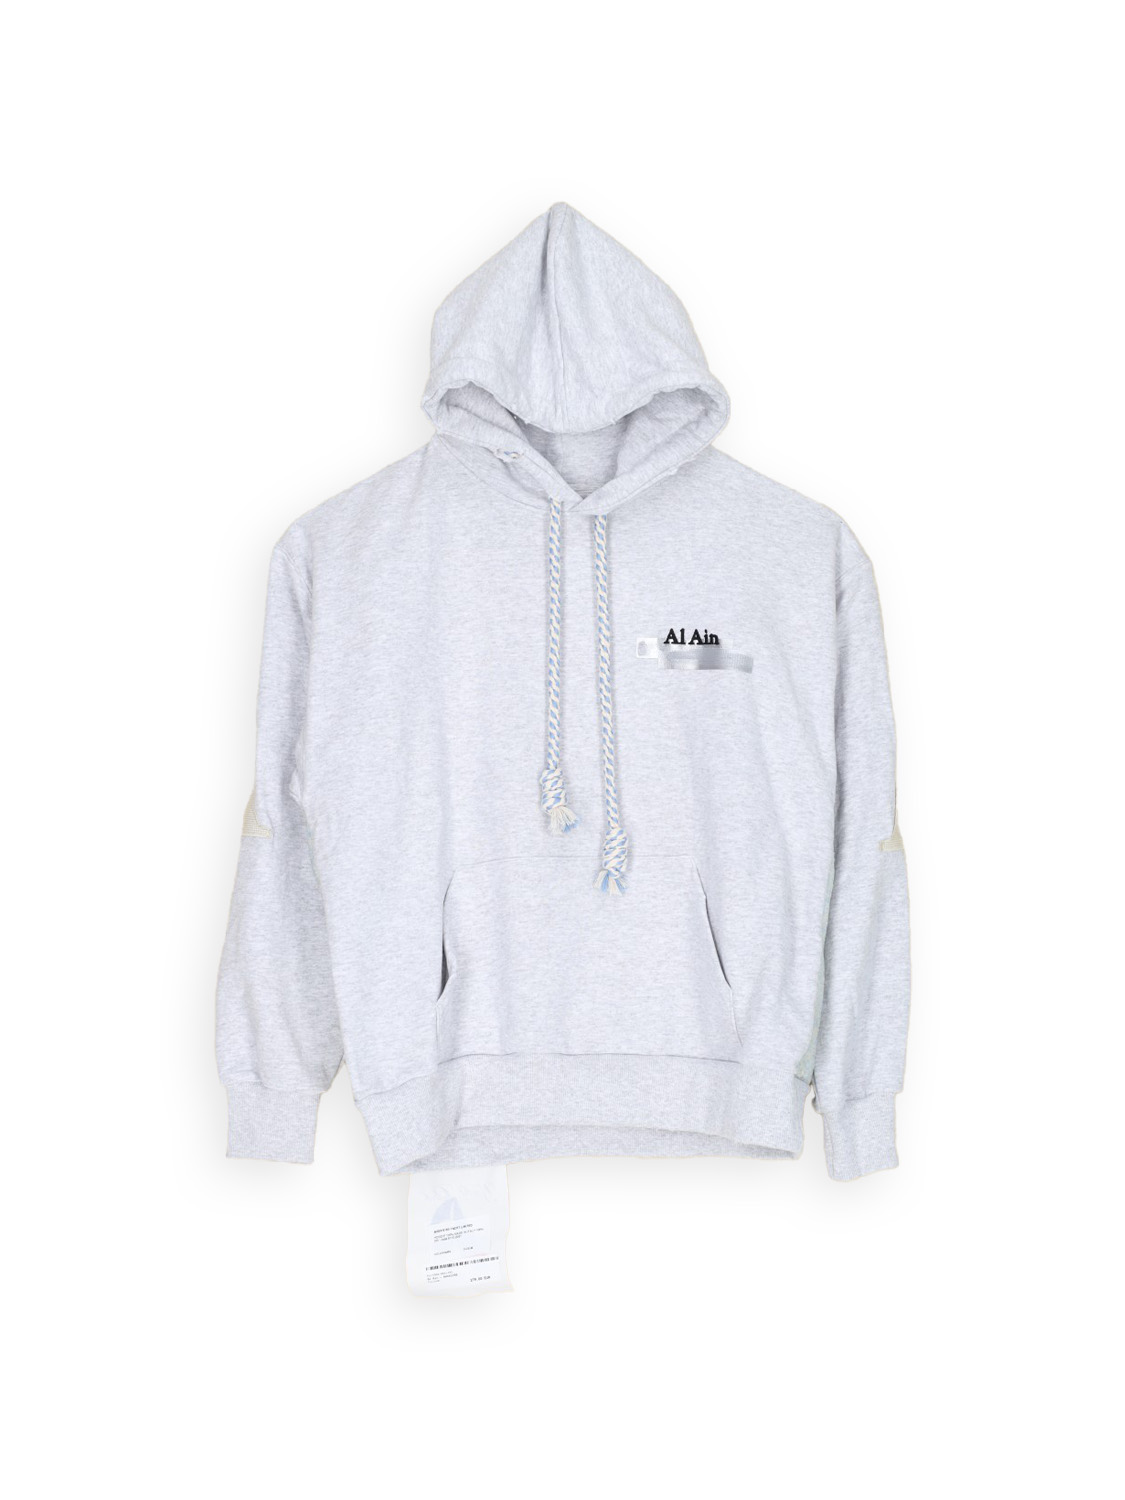 Ahox – Oversized Hoodie with pattern 